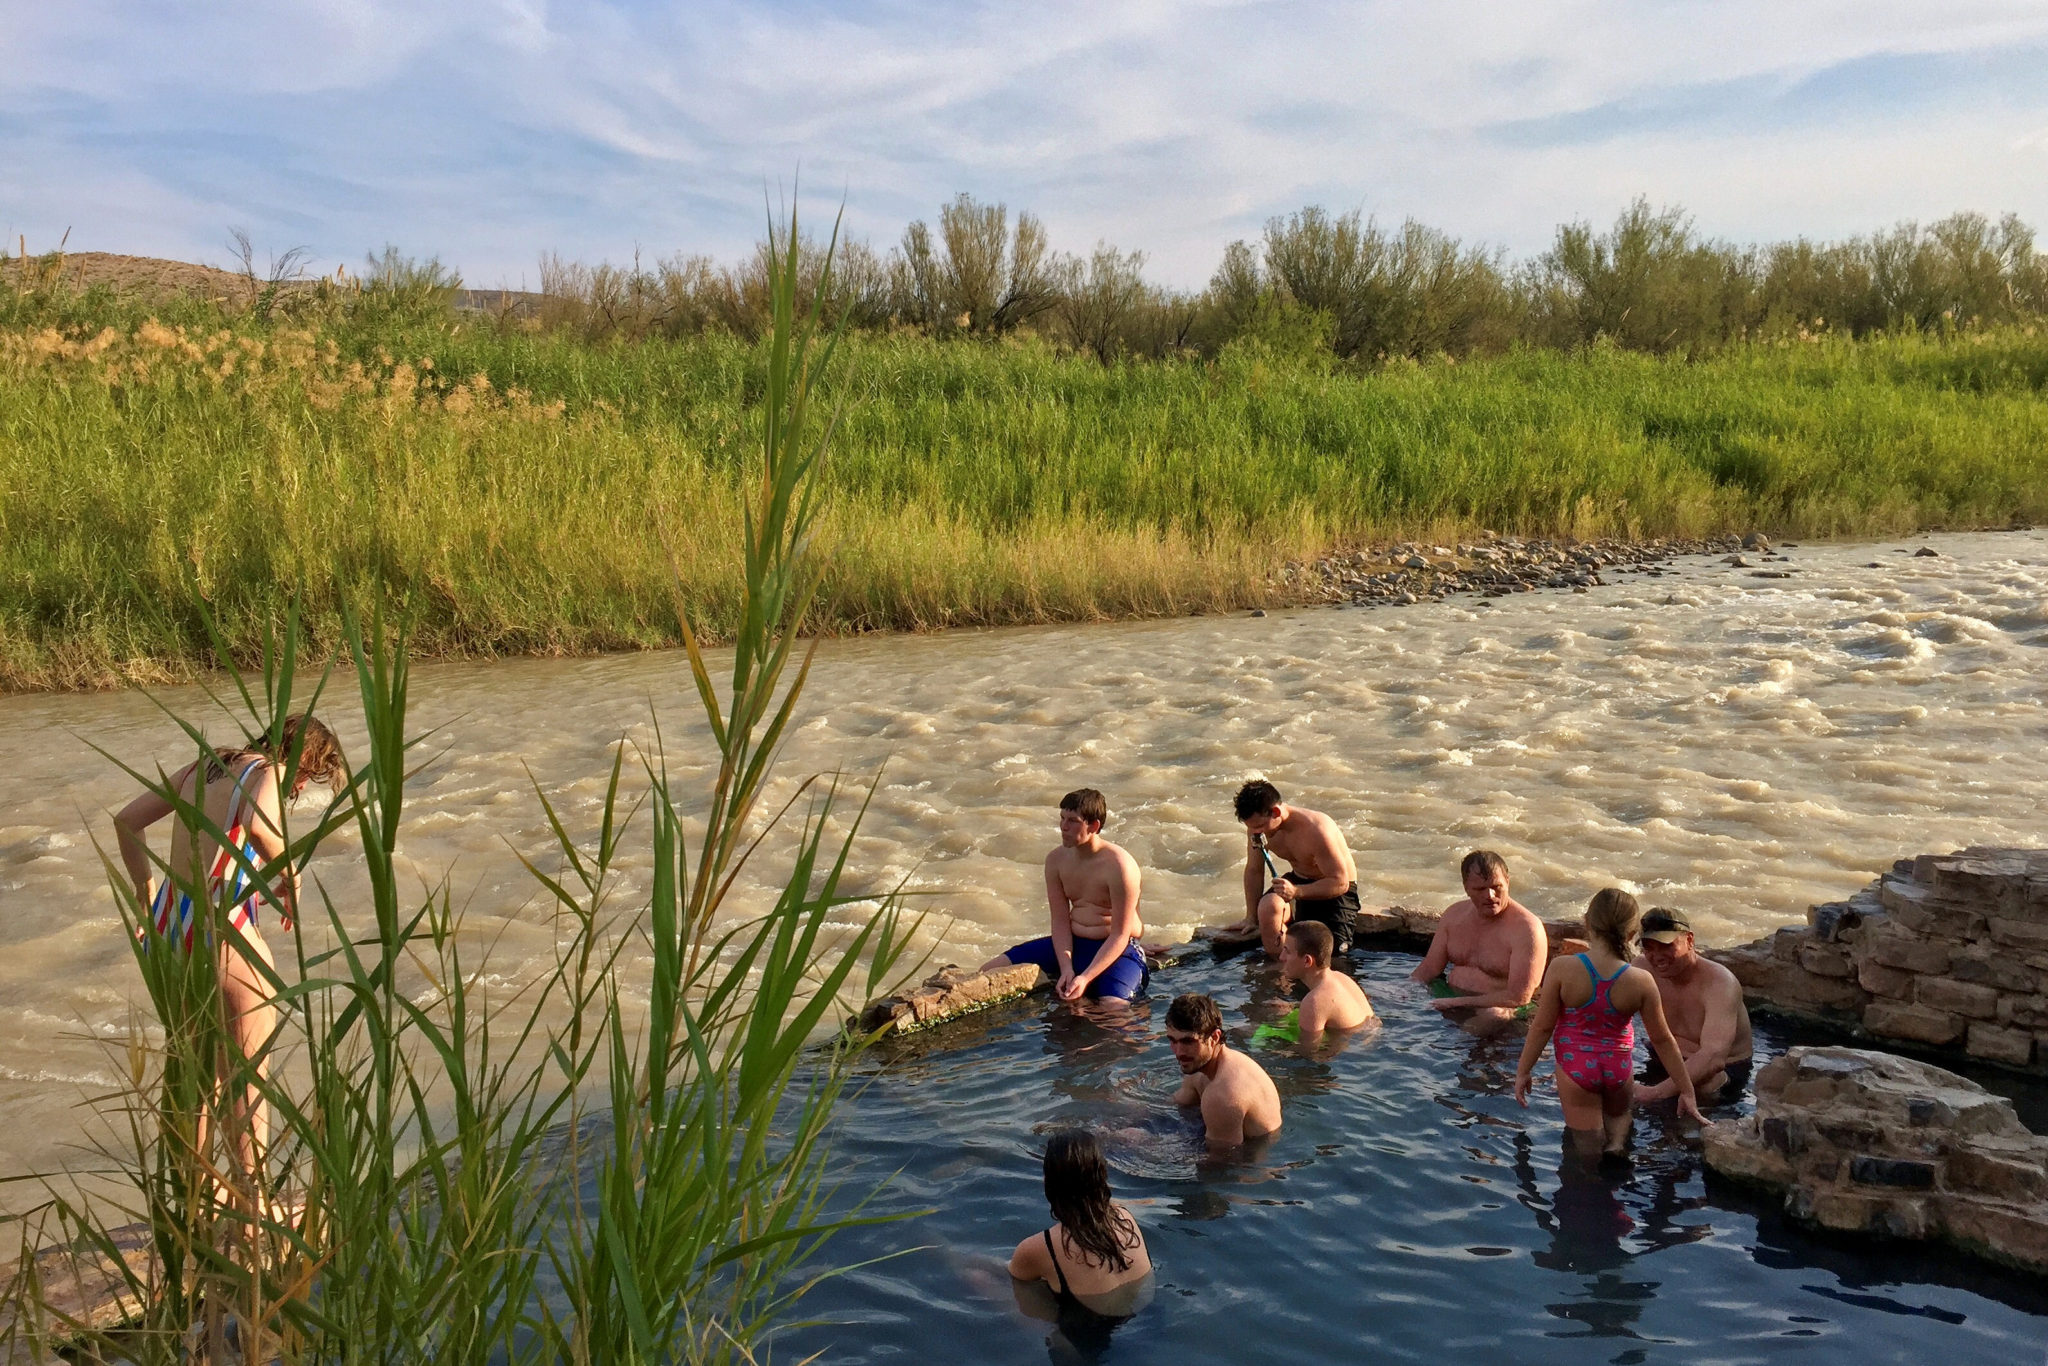 Visitors bathing in the hot springs near the Rio Grande River in Big Bend National Park